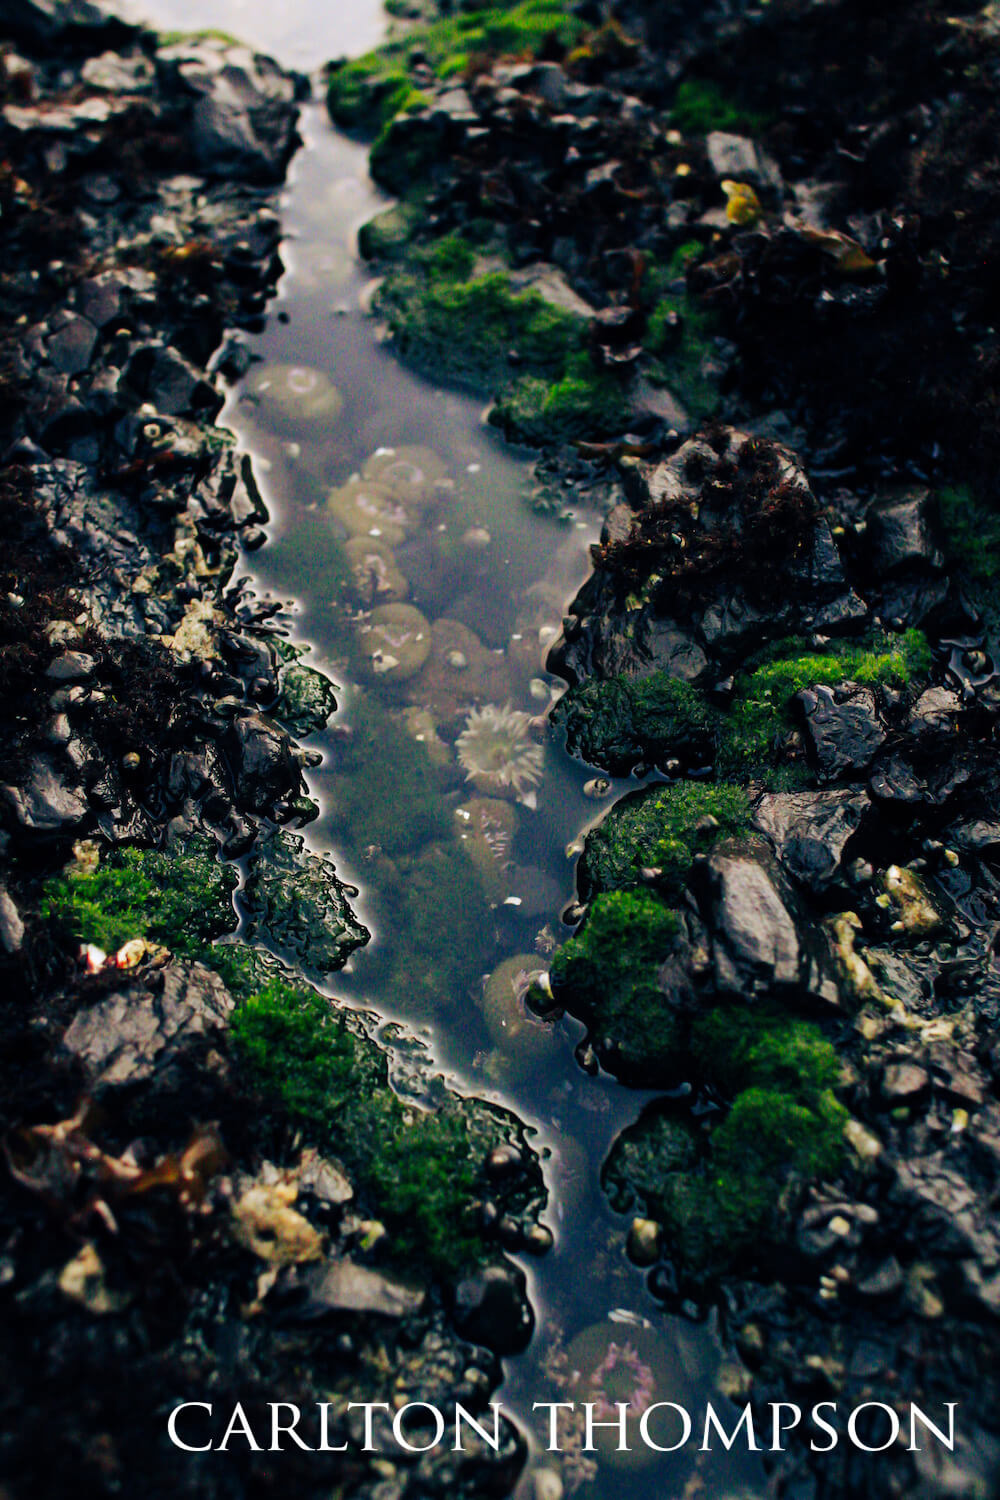 A thin, shallow strip of water flowing through stumpy hills of mollusks and sea anemones.